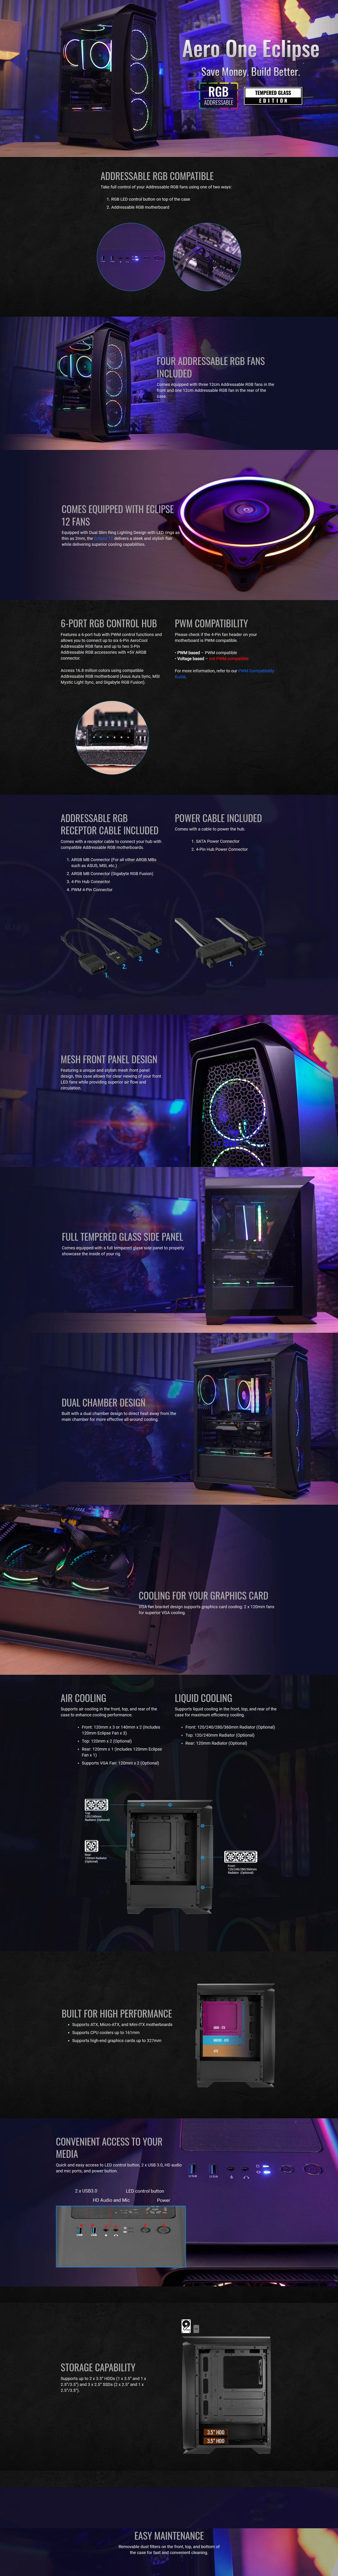 Overview - Aerocool - Aero One Eclipse Tempered Glass Edition ARGB Mid Tower Chassis